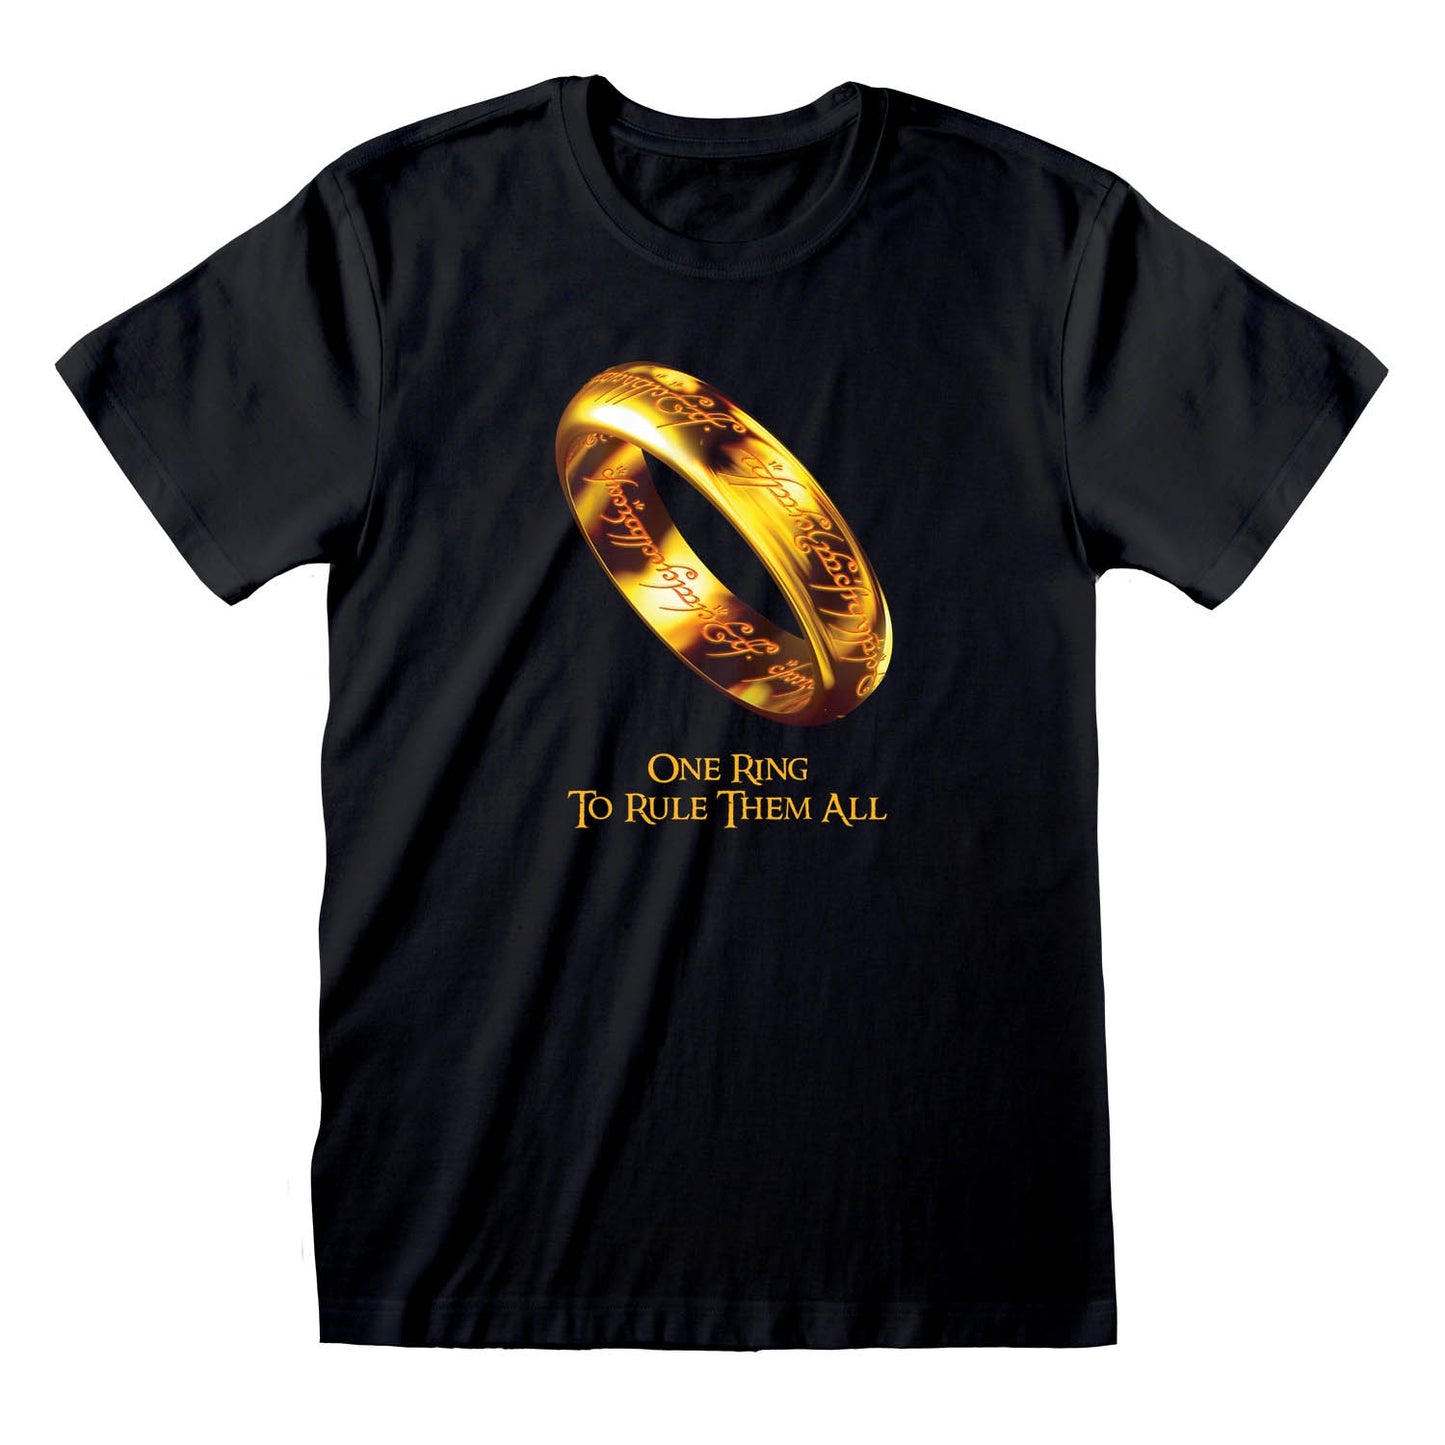 LORD OF THE RINGS - One Ring to Rule Them All T-Shirt